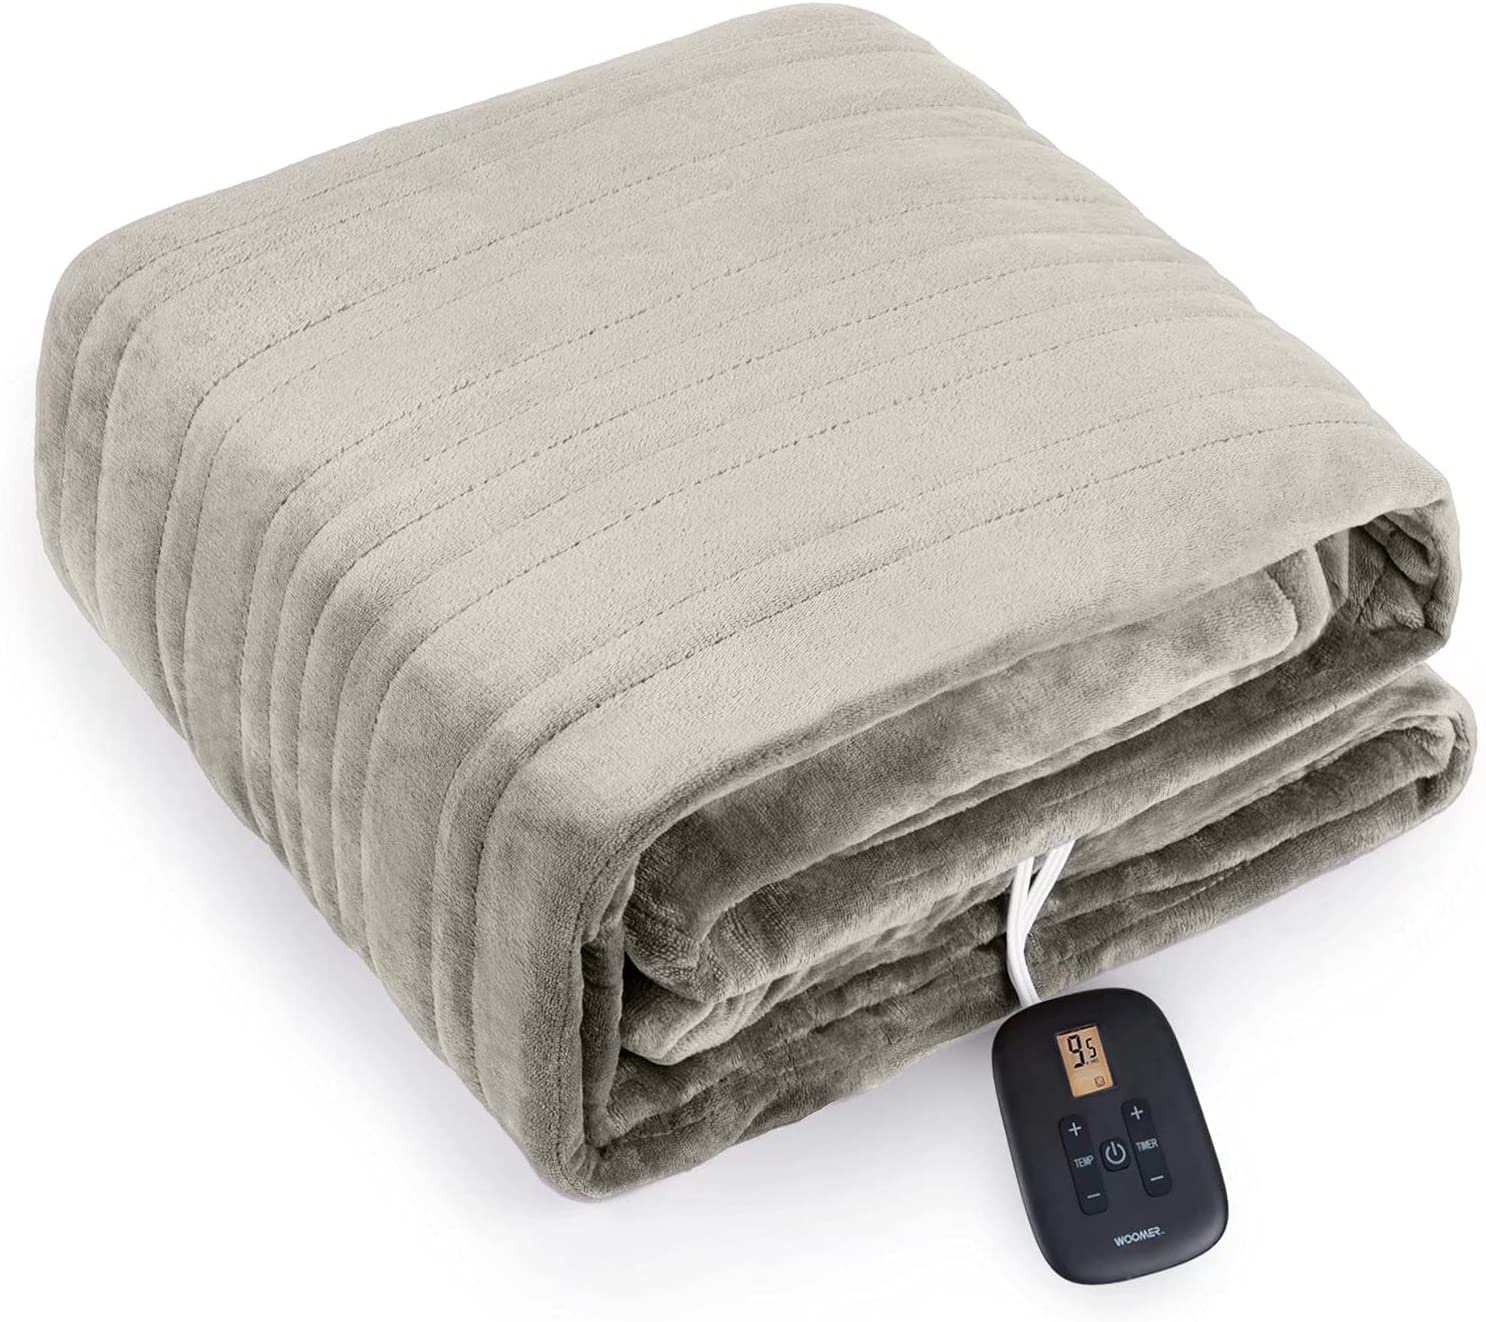 Electric Heating Blanket - Flannel Sherpa - Taupe - 62"x 84"